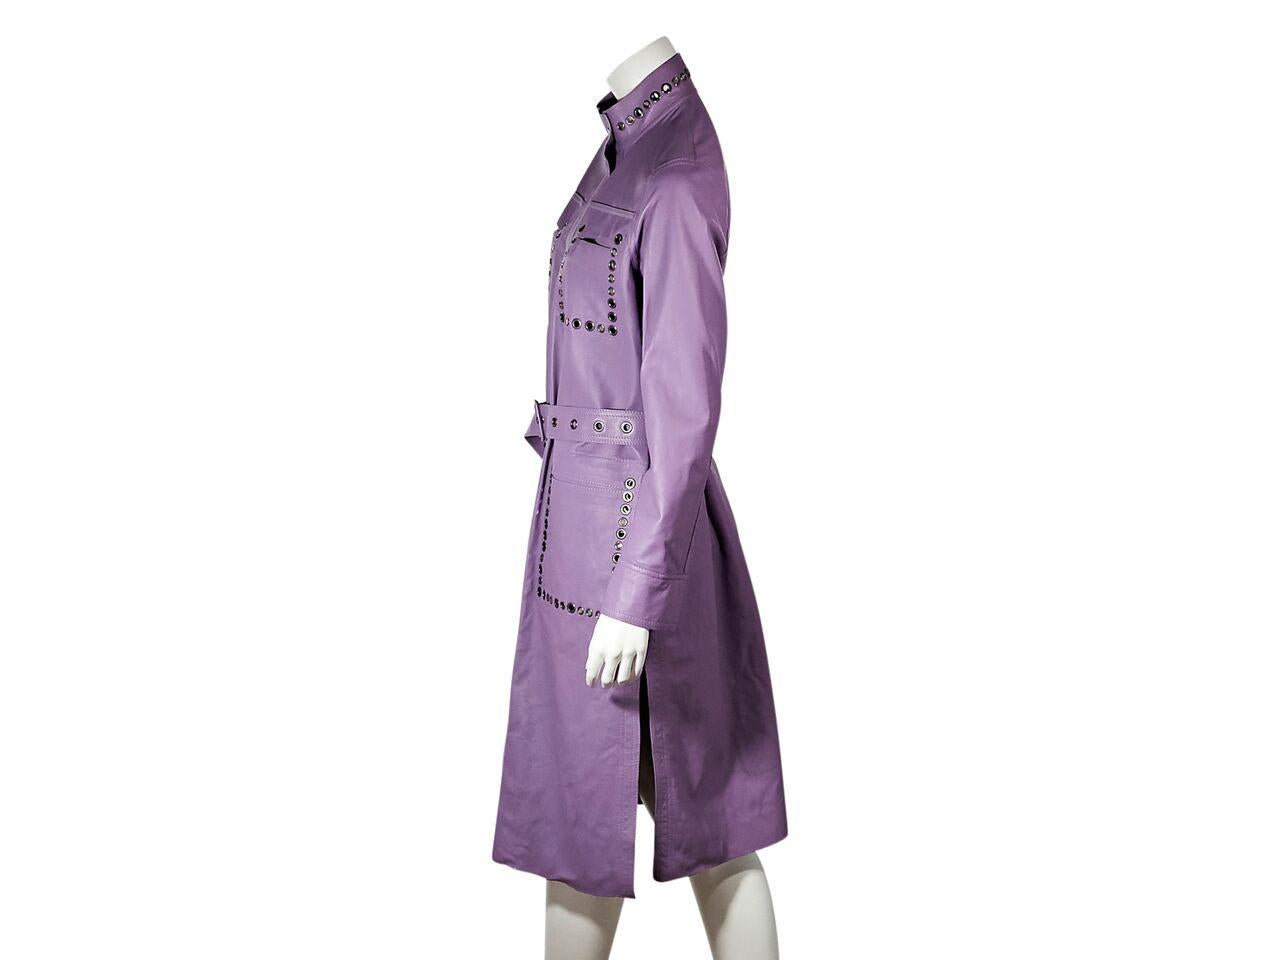 Product details:  Purple suede and leather reversible coat by Bottega Veneta.  From the SS '18 collection.  Accented with grommets.  Stand collar.  Long sleeves.  Snap-front closure.  Adjustable belted waist.  Flap front pockets.  Reversible side